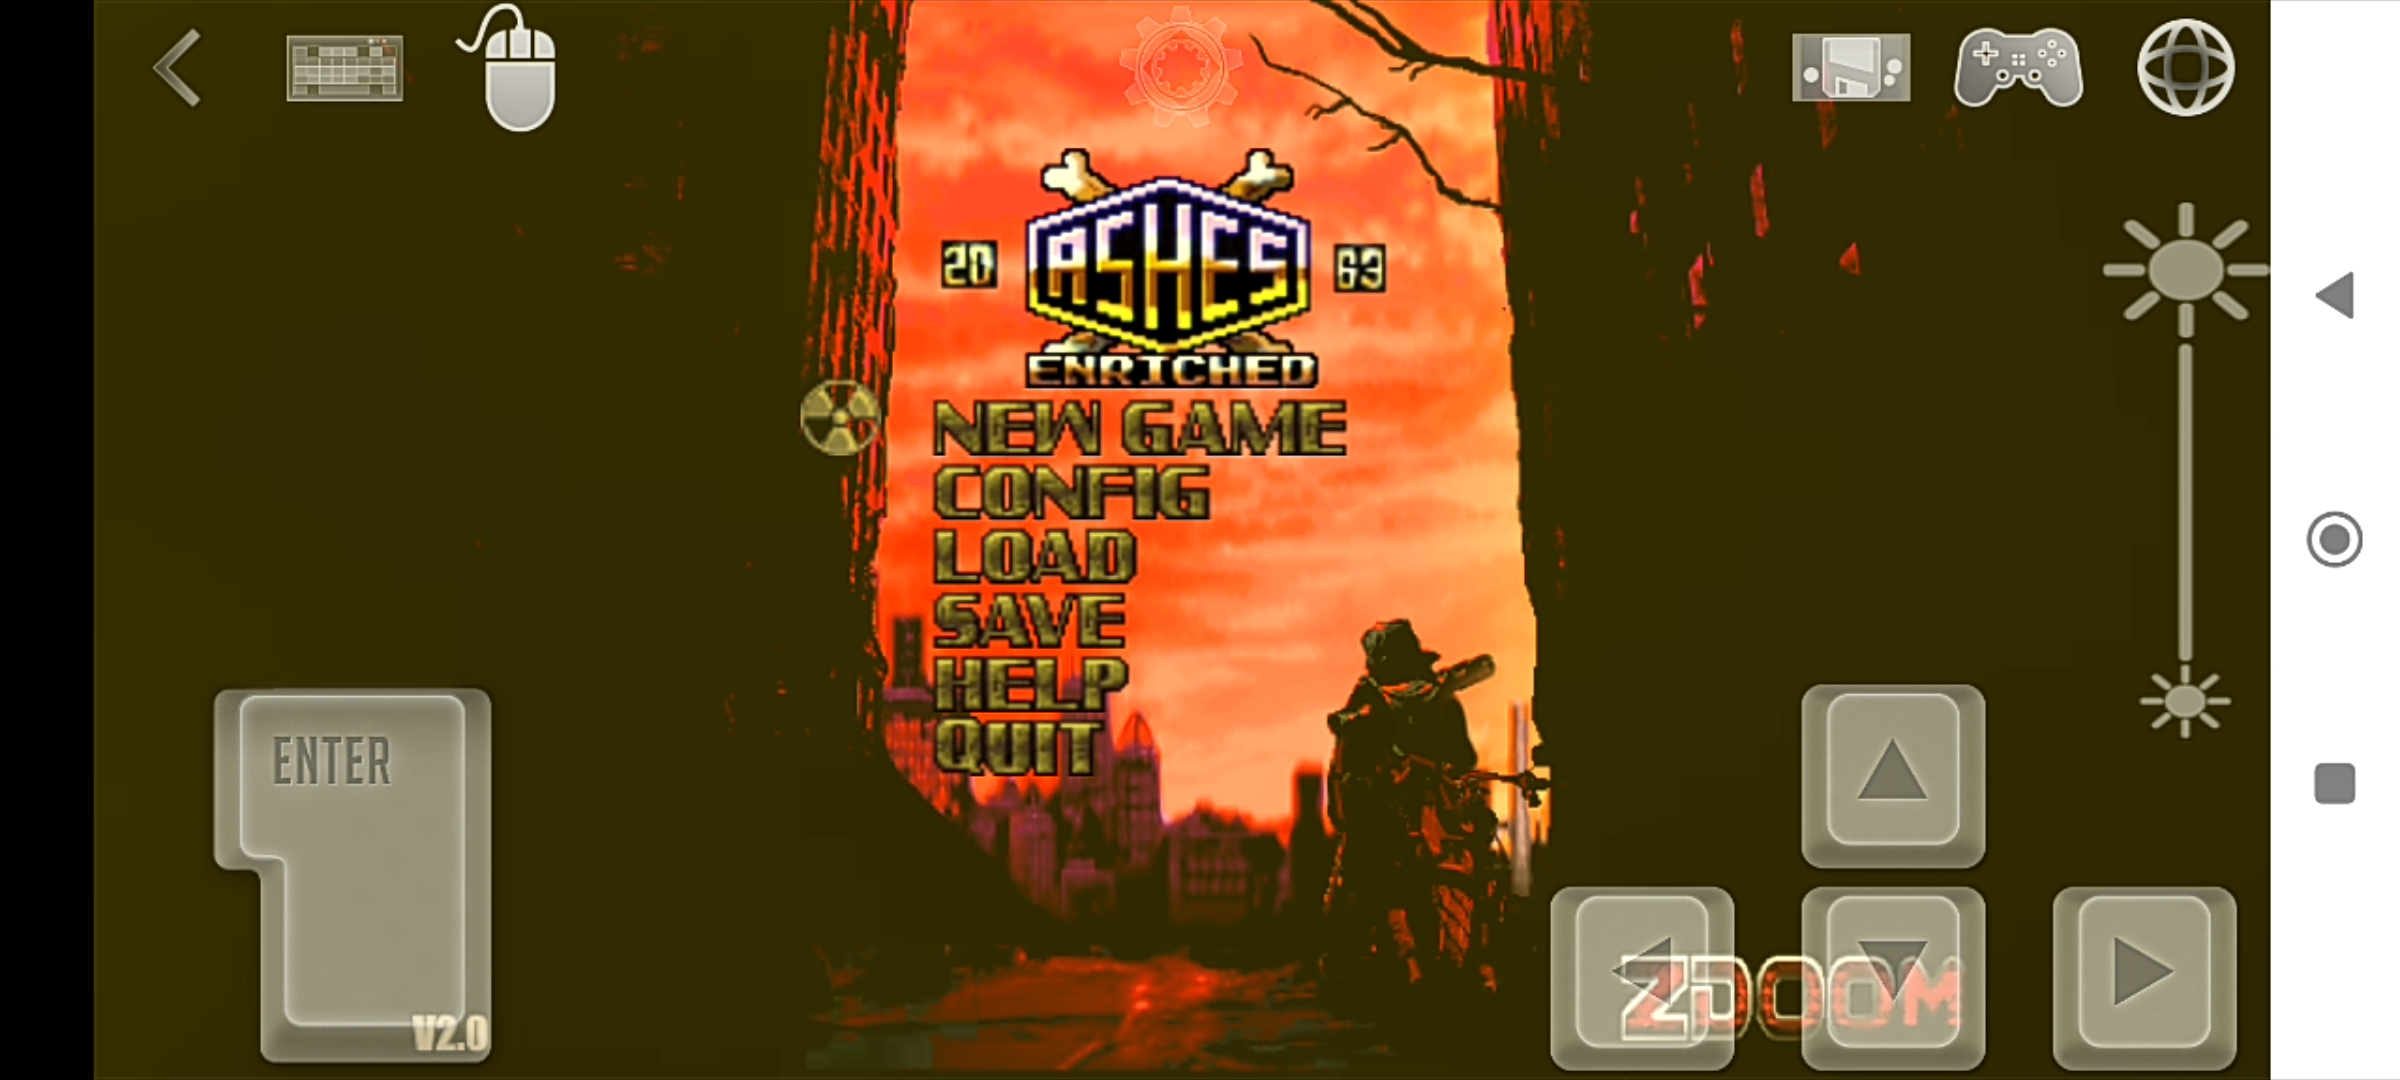 Game Ashes 2063 Stand Alone Apocalyptic - Thế Giới Hậu Tận Thế Fallout X Stalker Cho Android